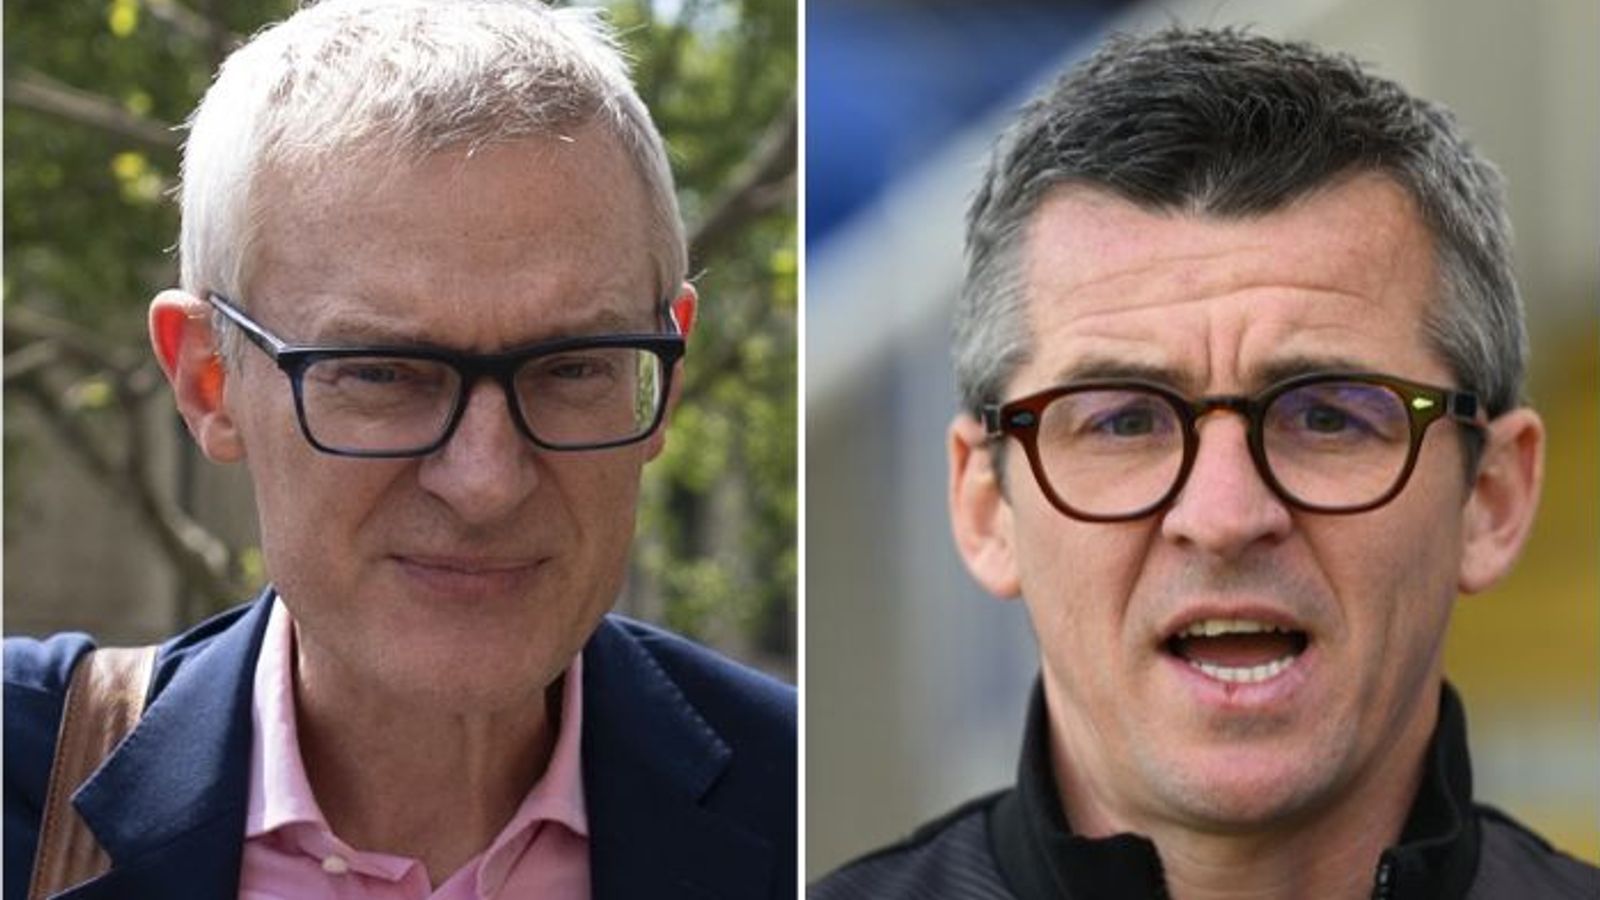 Jeremy Vine says Joey Barton's payout 'not final outcome' of libel case